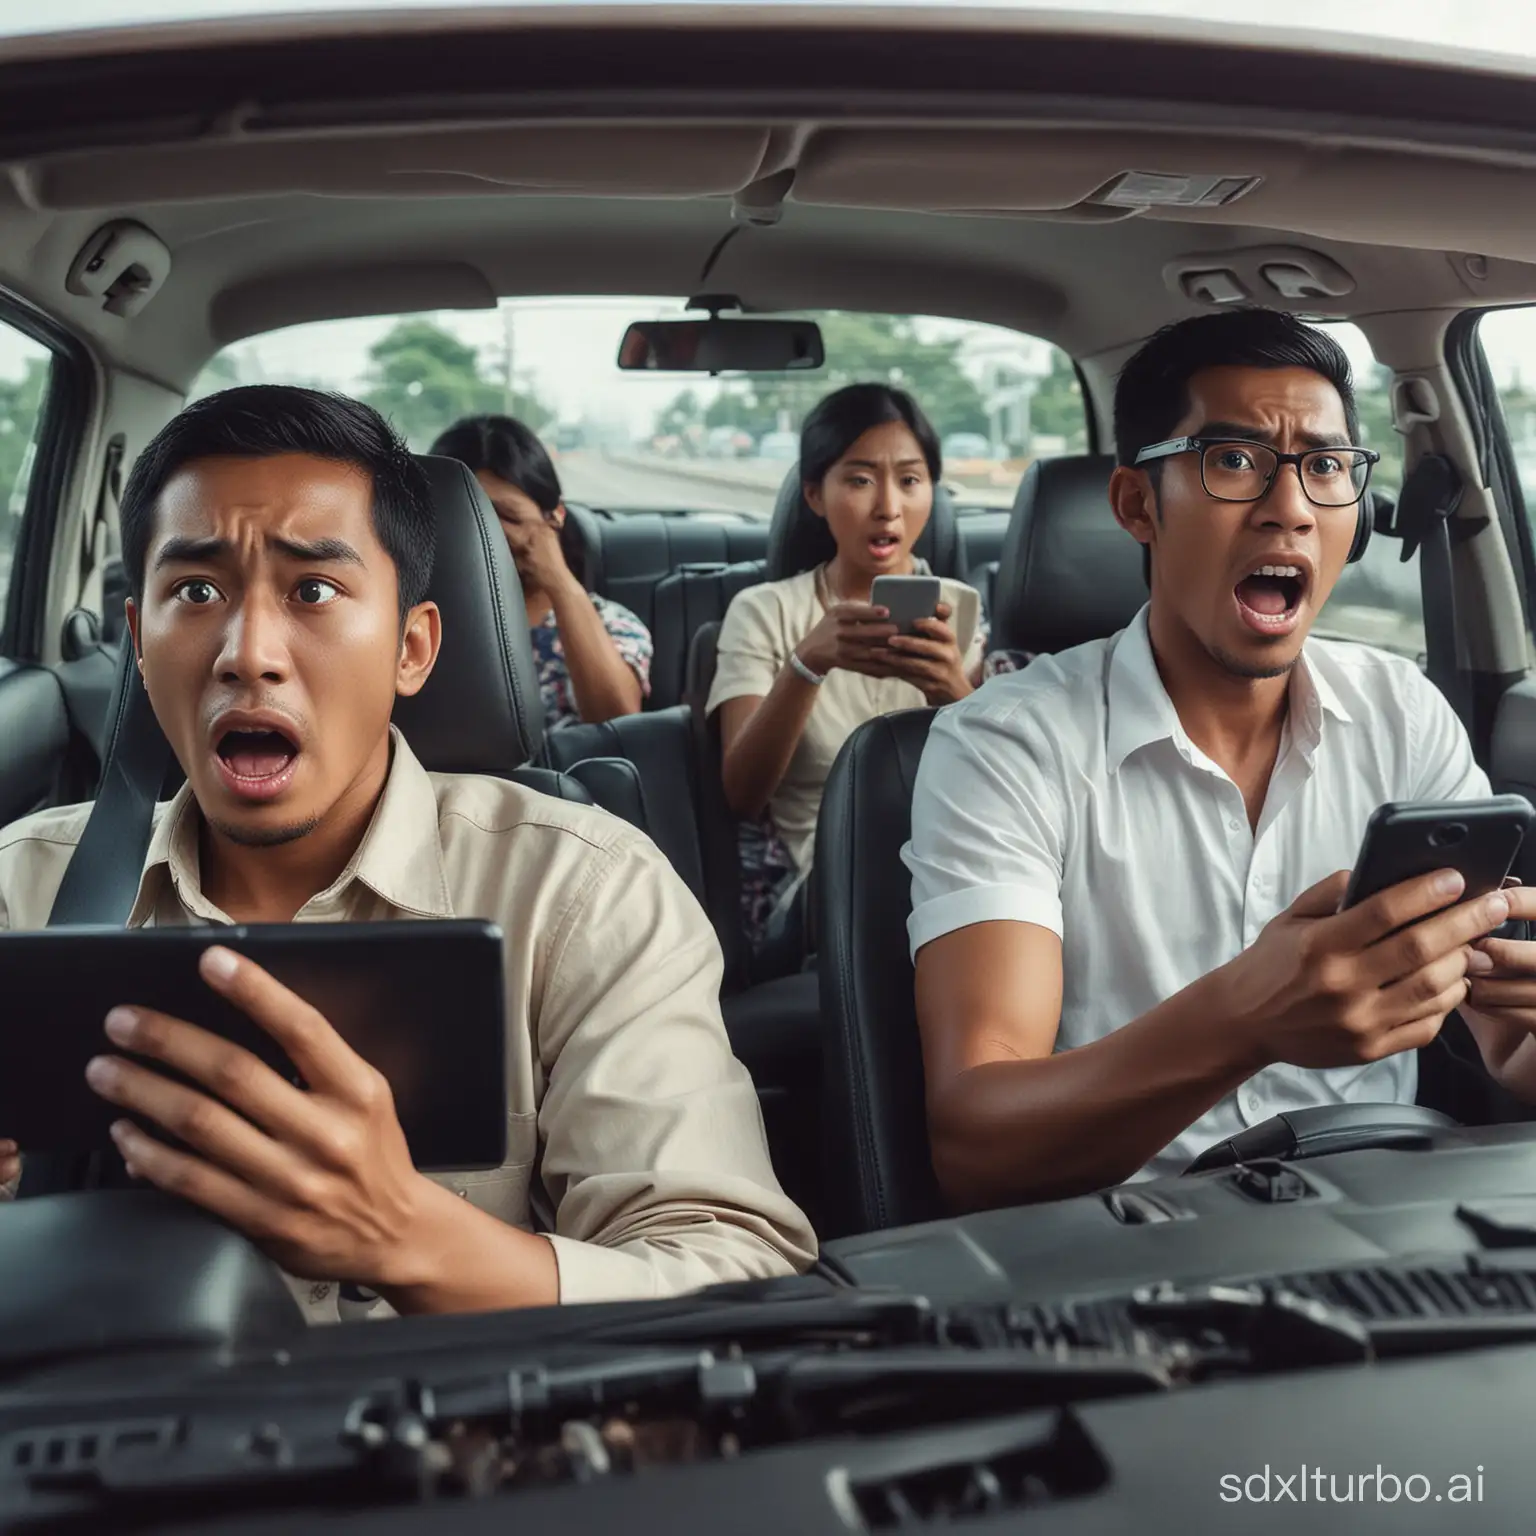 Create a hyper realistic image from the prompt below Indonesian people who are driving cars are stopping with shocked faces while reading their smartphones